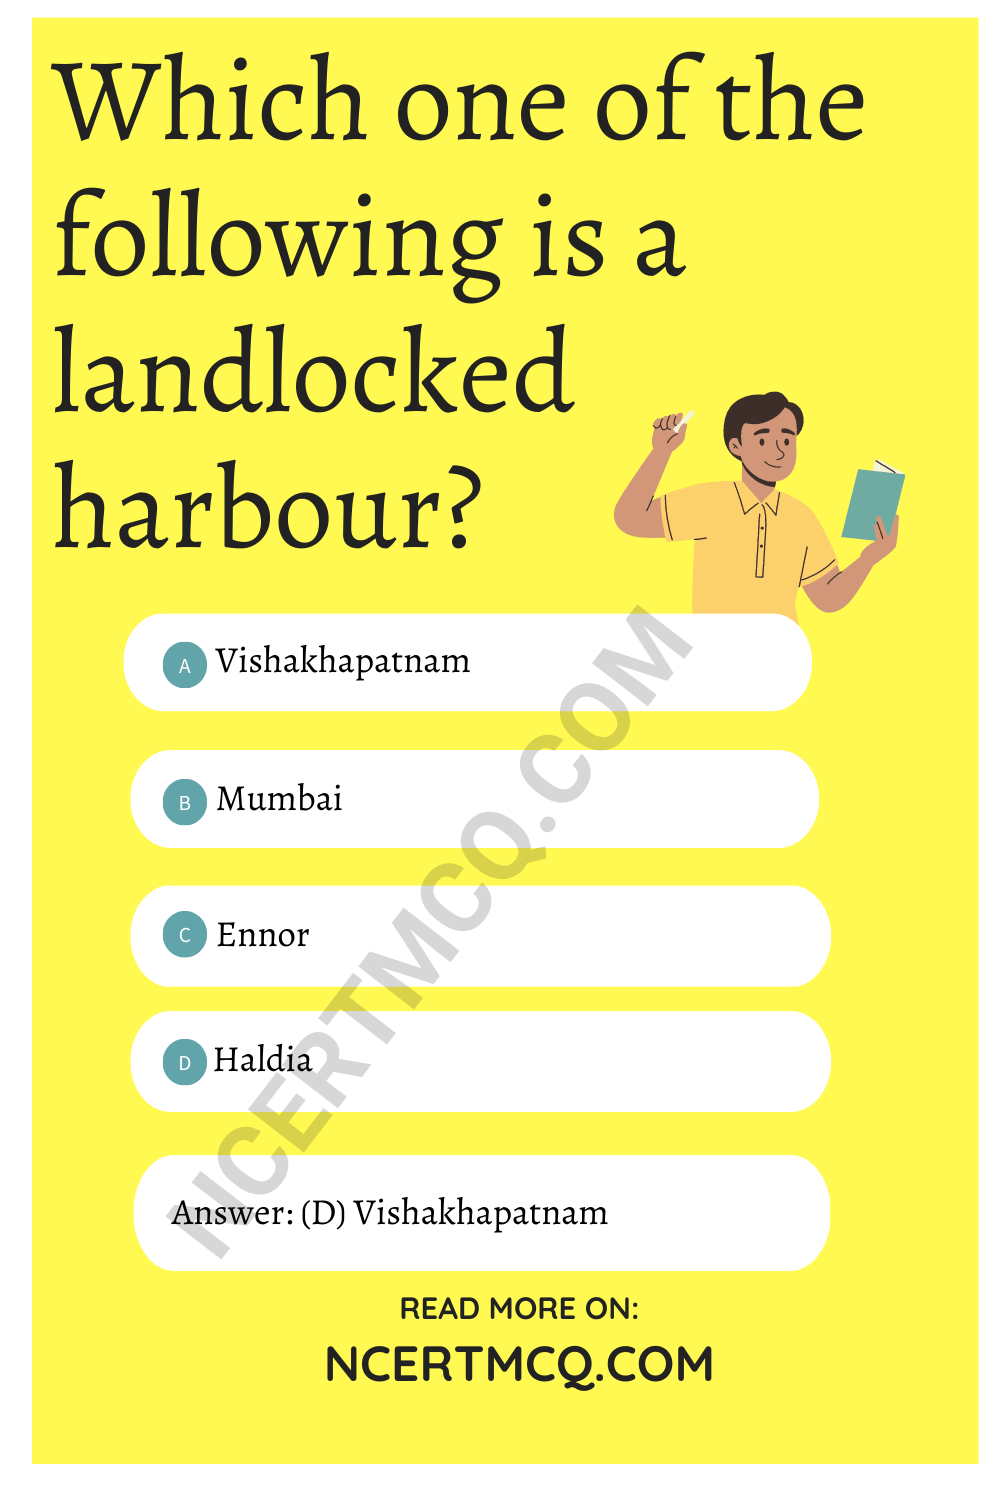 Which one of the following is a landlocked harbour?